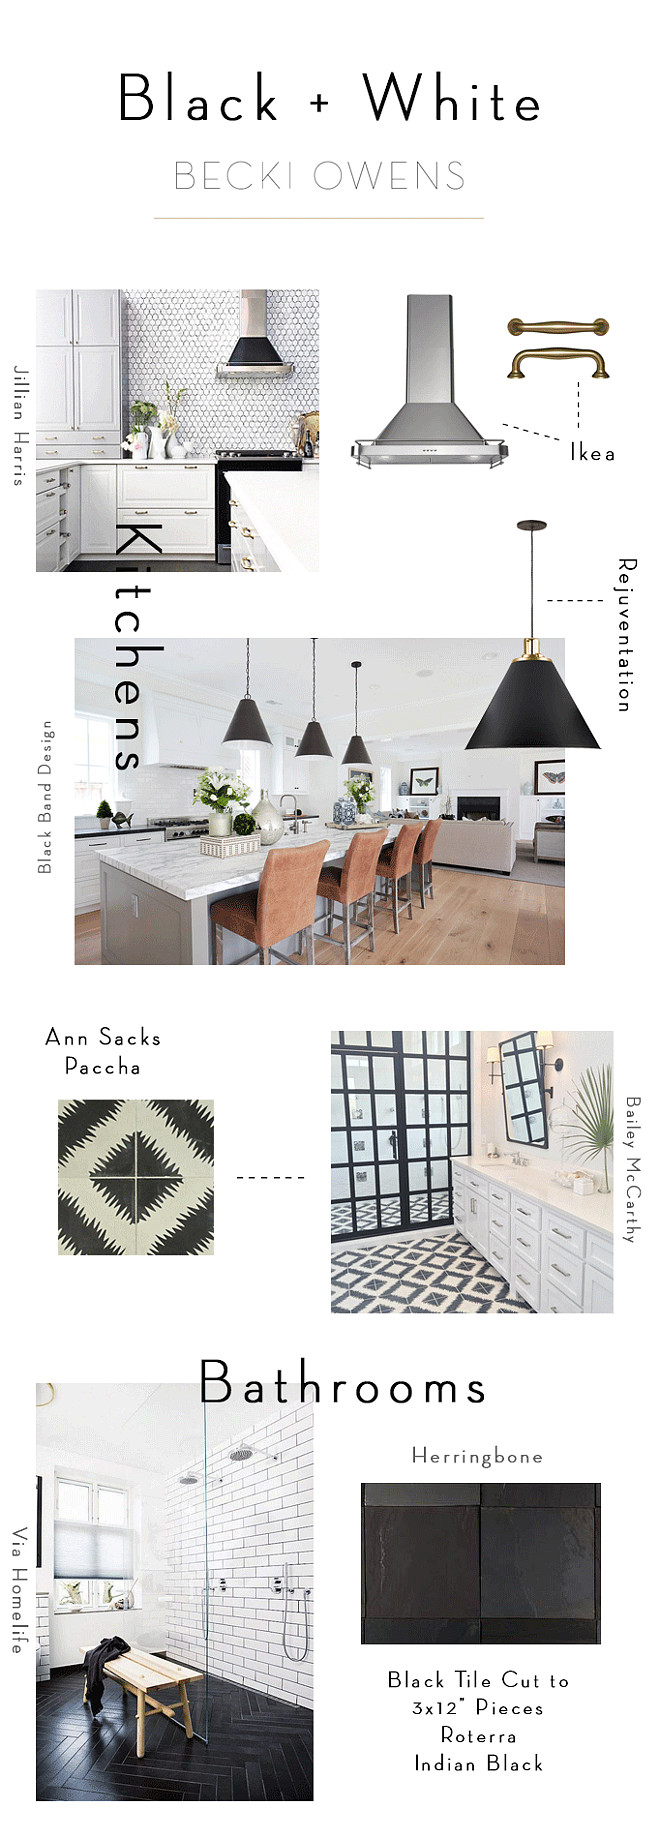 Black and white kitchens and bathroom interiors. How to design black and white interiors. Black and white interior guide. Becki Owens.